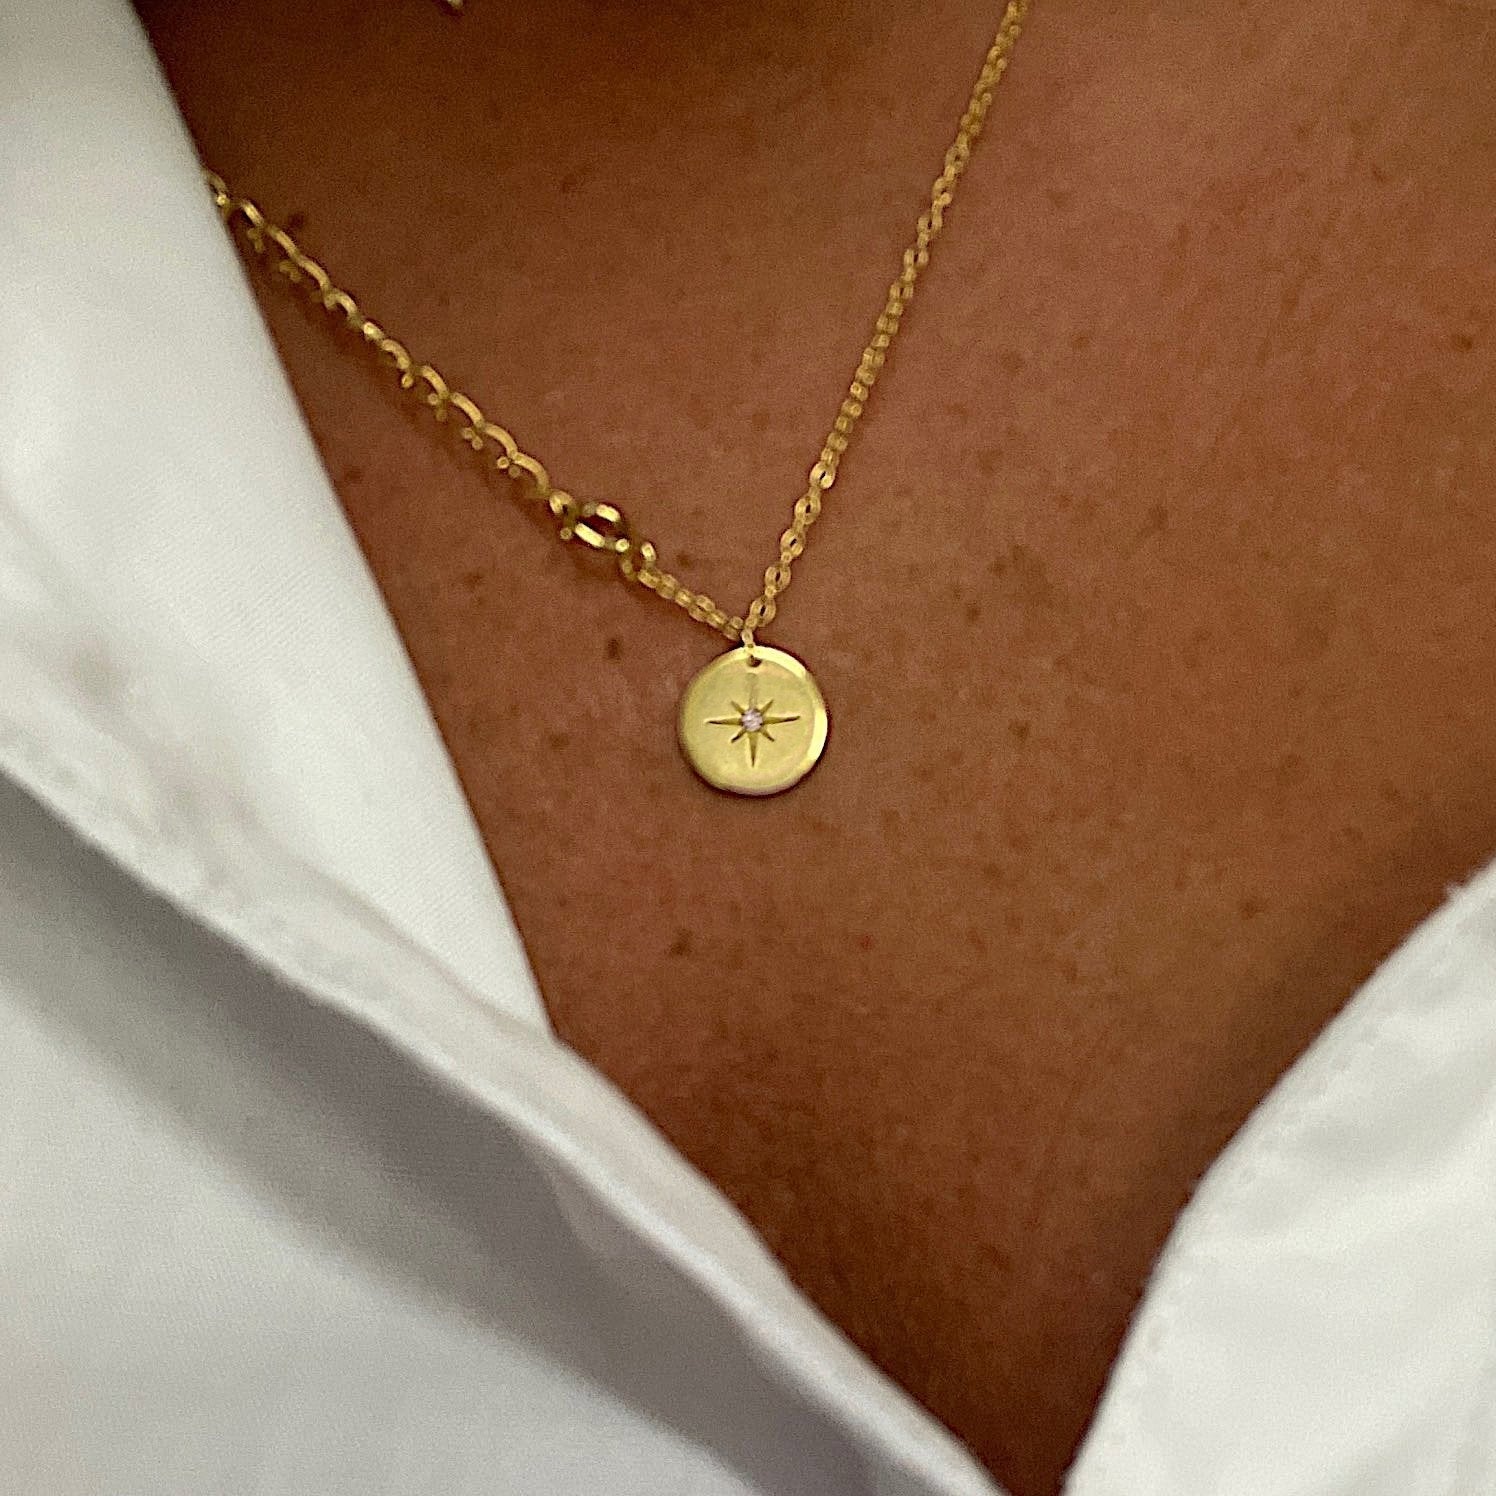 A woman wearing a coin pendant necklace with a star motif.